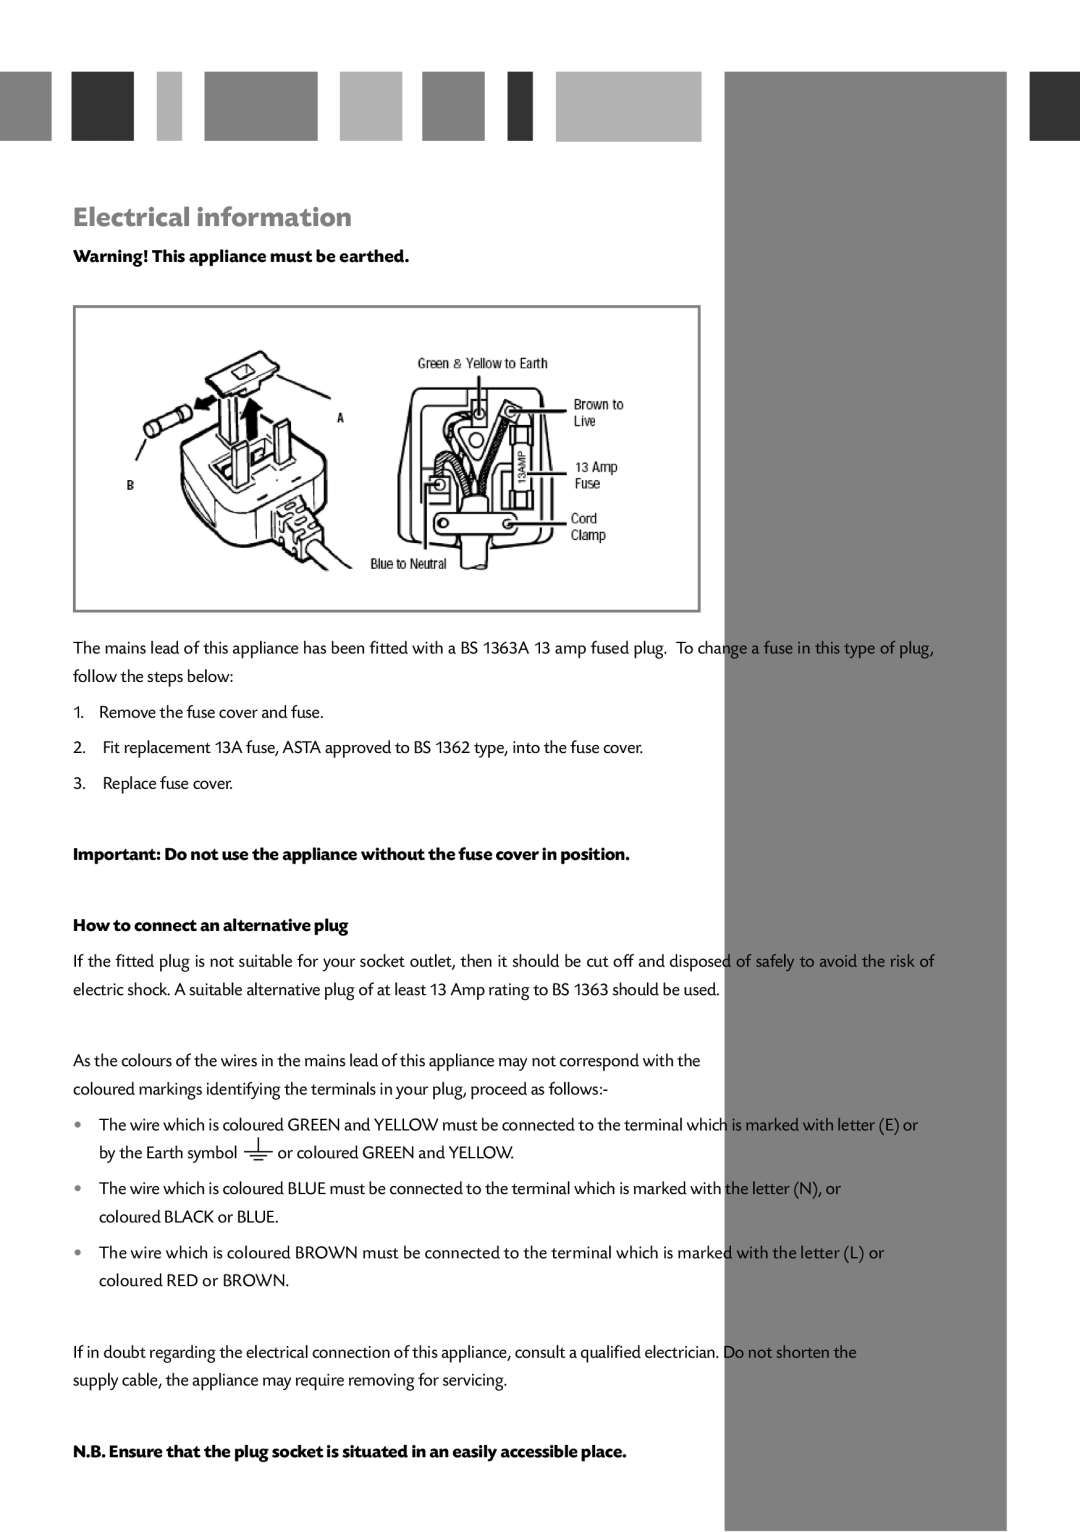 CDA WC140 manual Electrical information, Warning! This appliance must be earthed, How to connect an alternative plug 